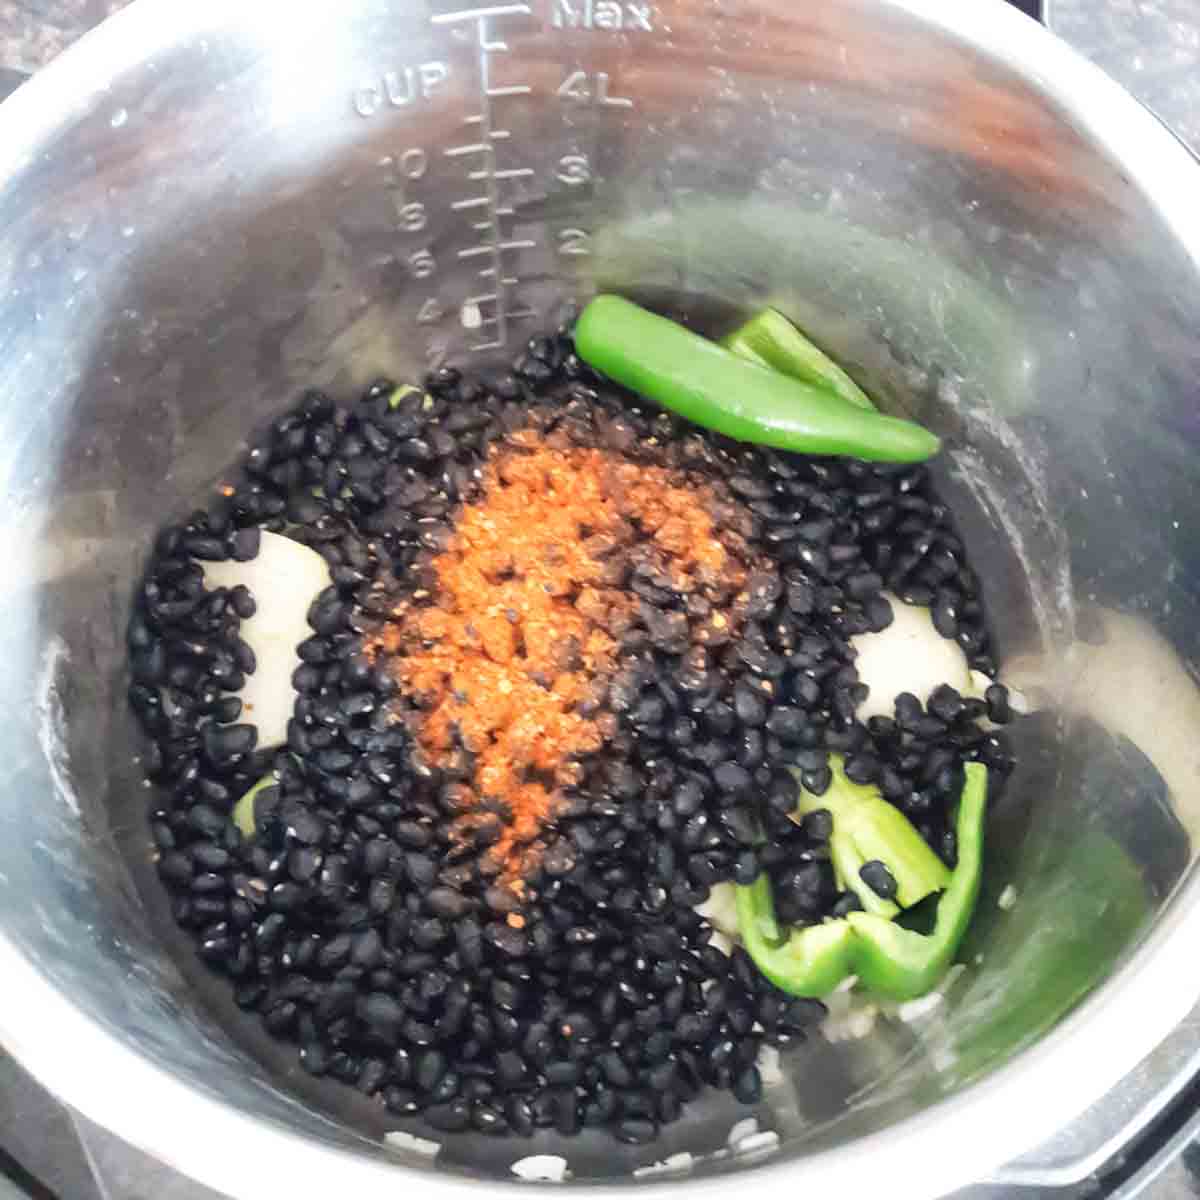 Rinsed black beans added in the Instant Pot for cooking.